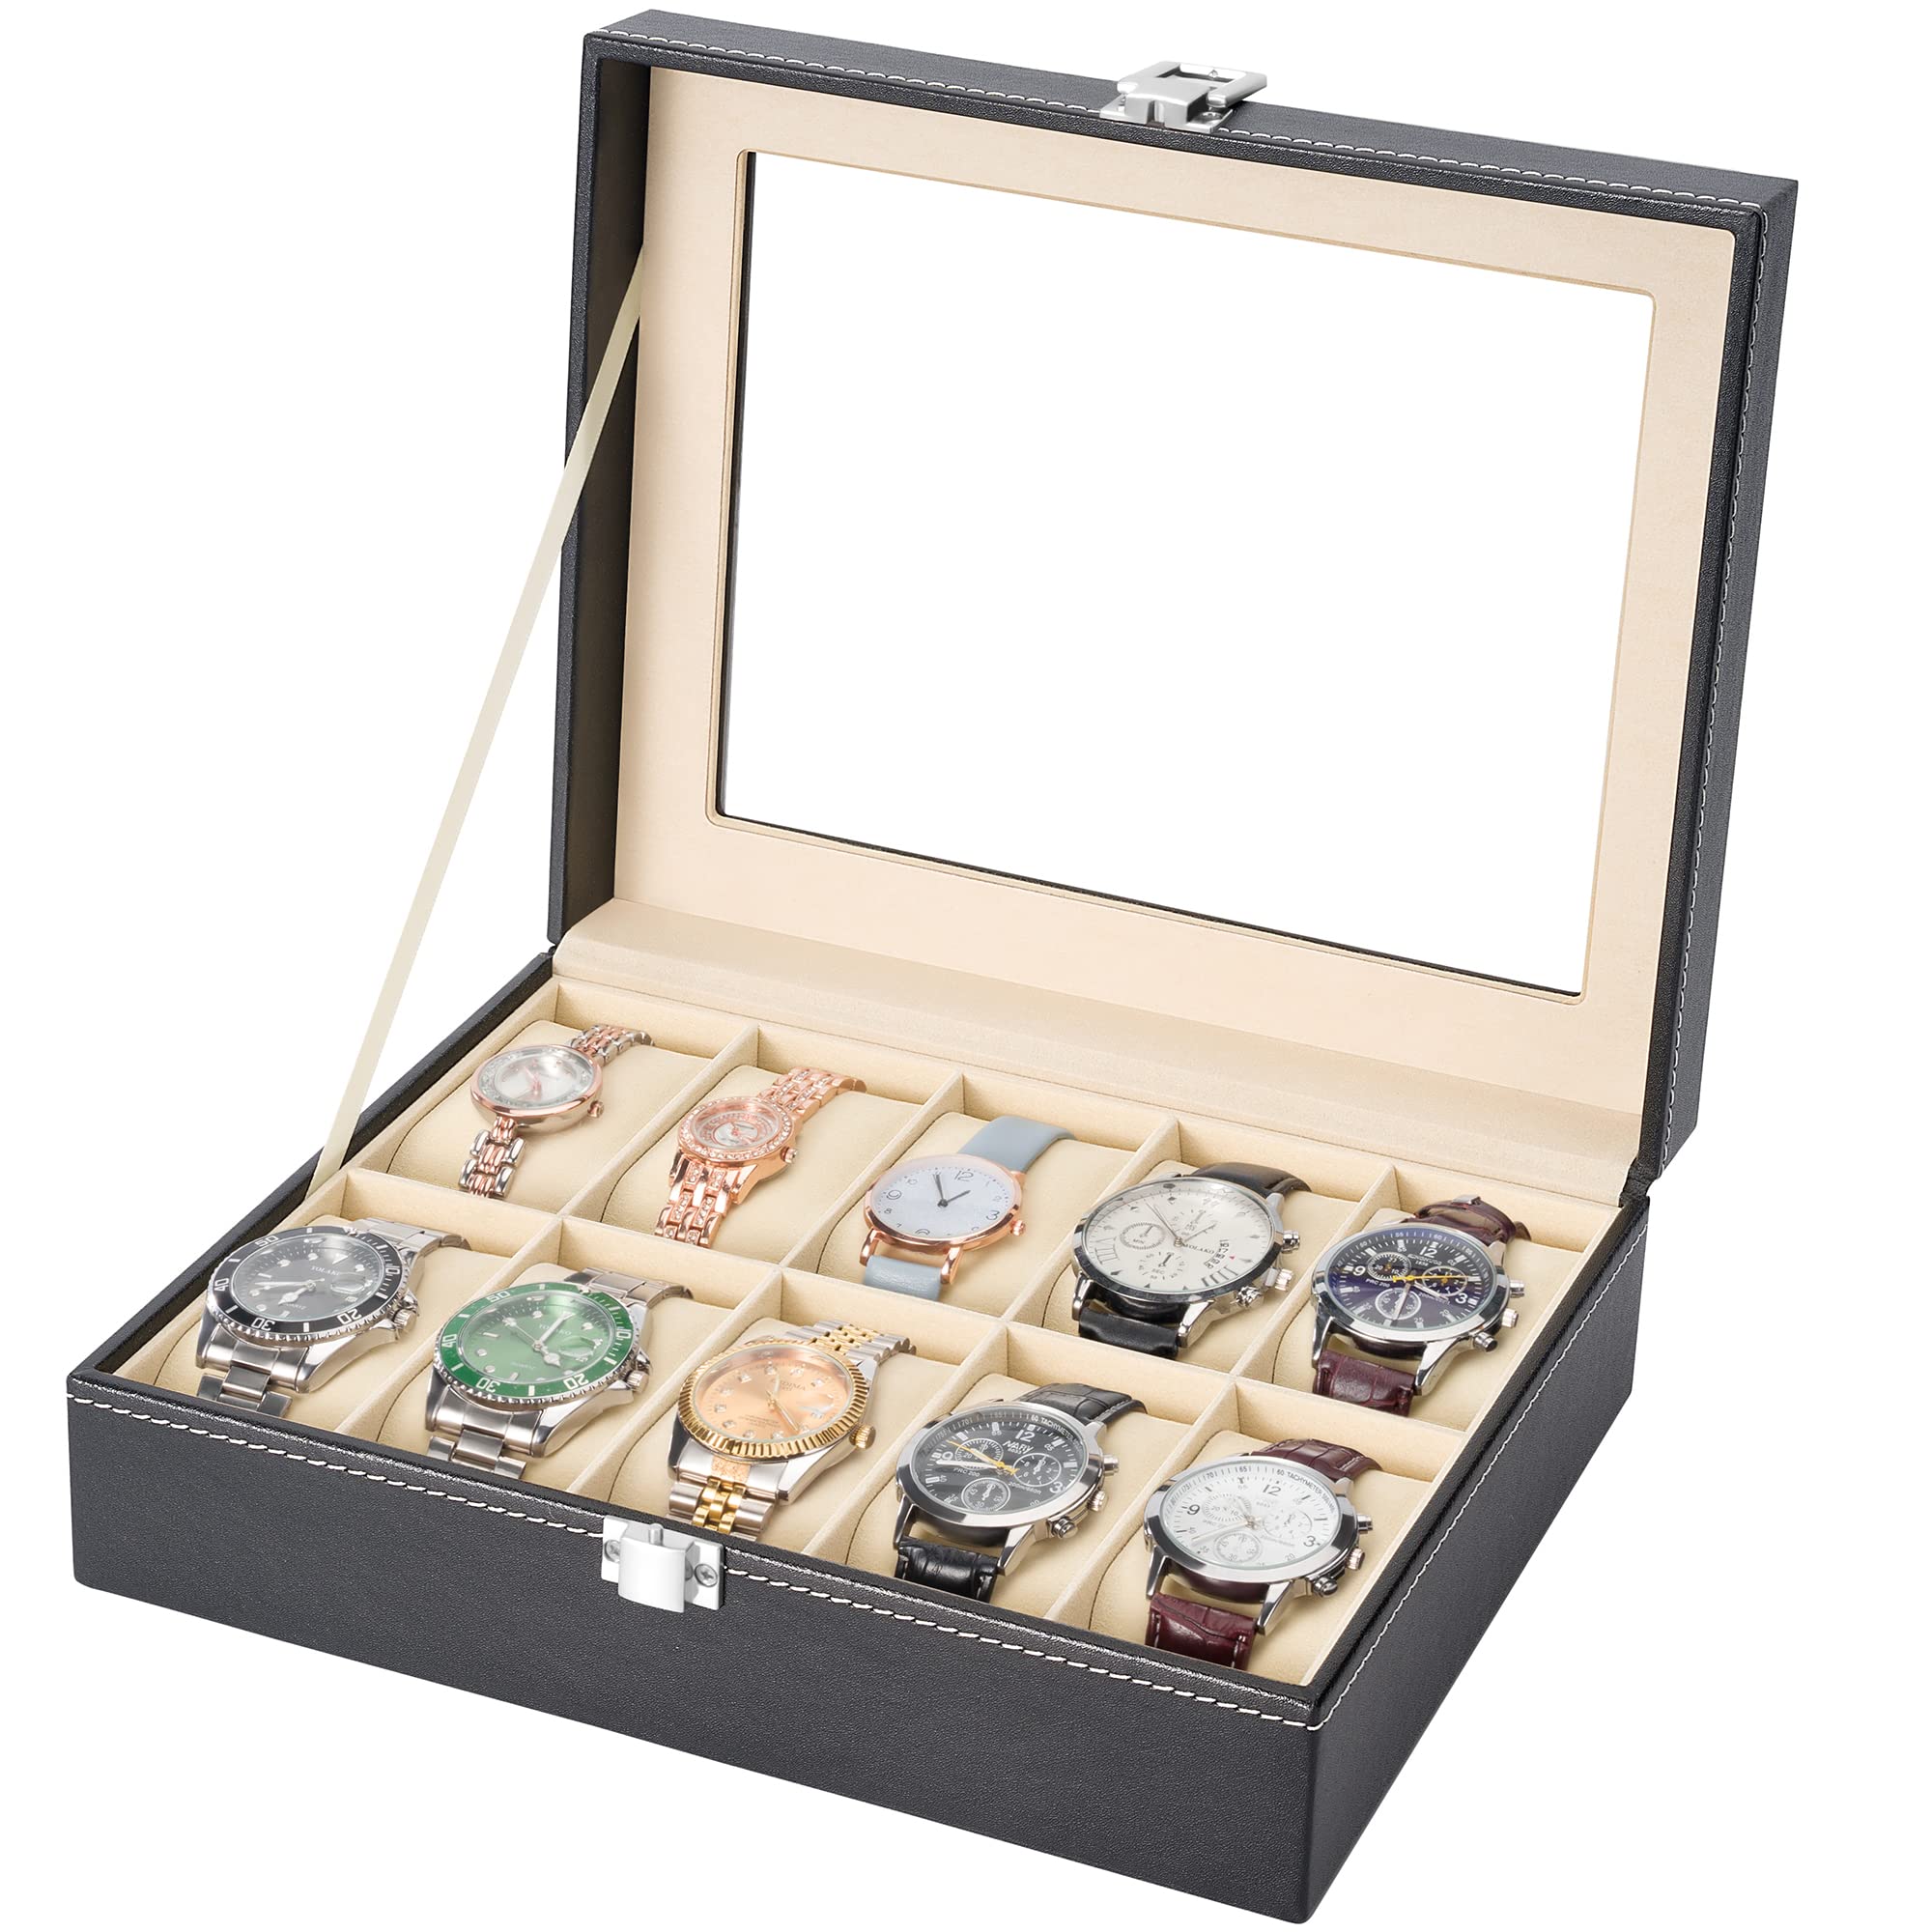 READAEER 10 Slot PU Leather Watch Box Display Case Jewelry Organizer with Glass Top